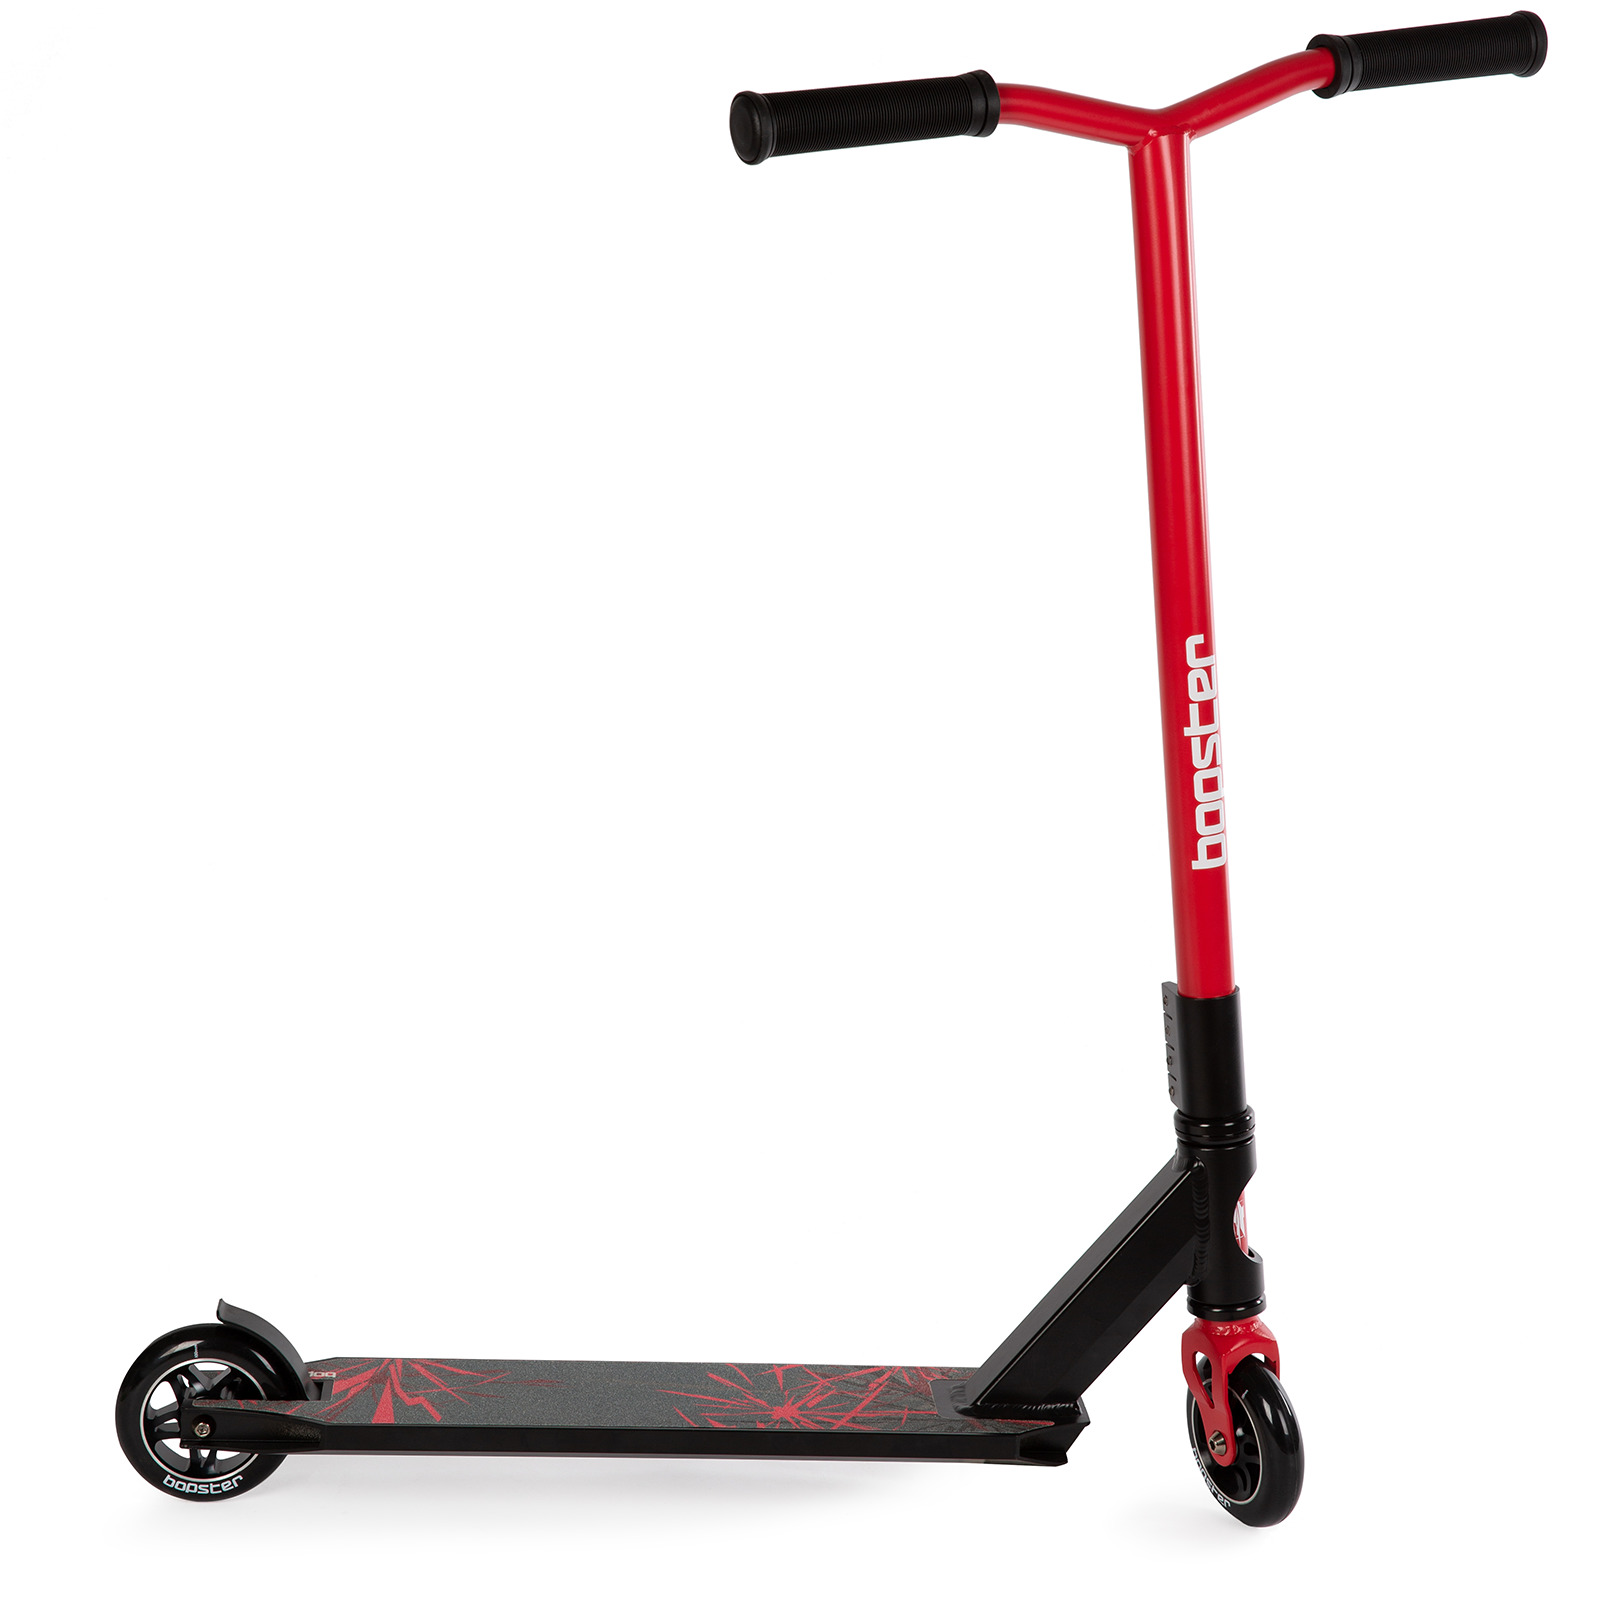 Bopster Stunt Scooter - Red